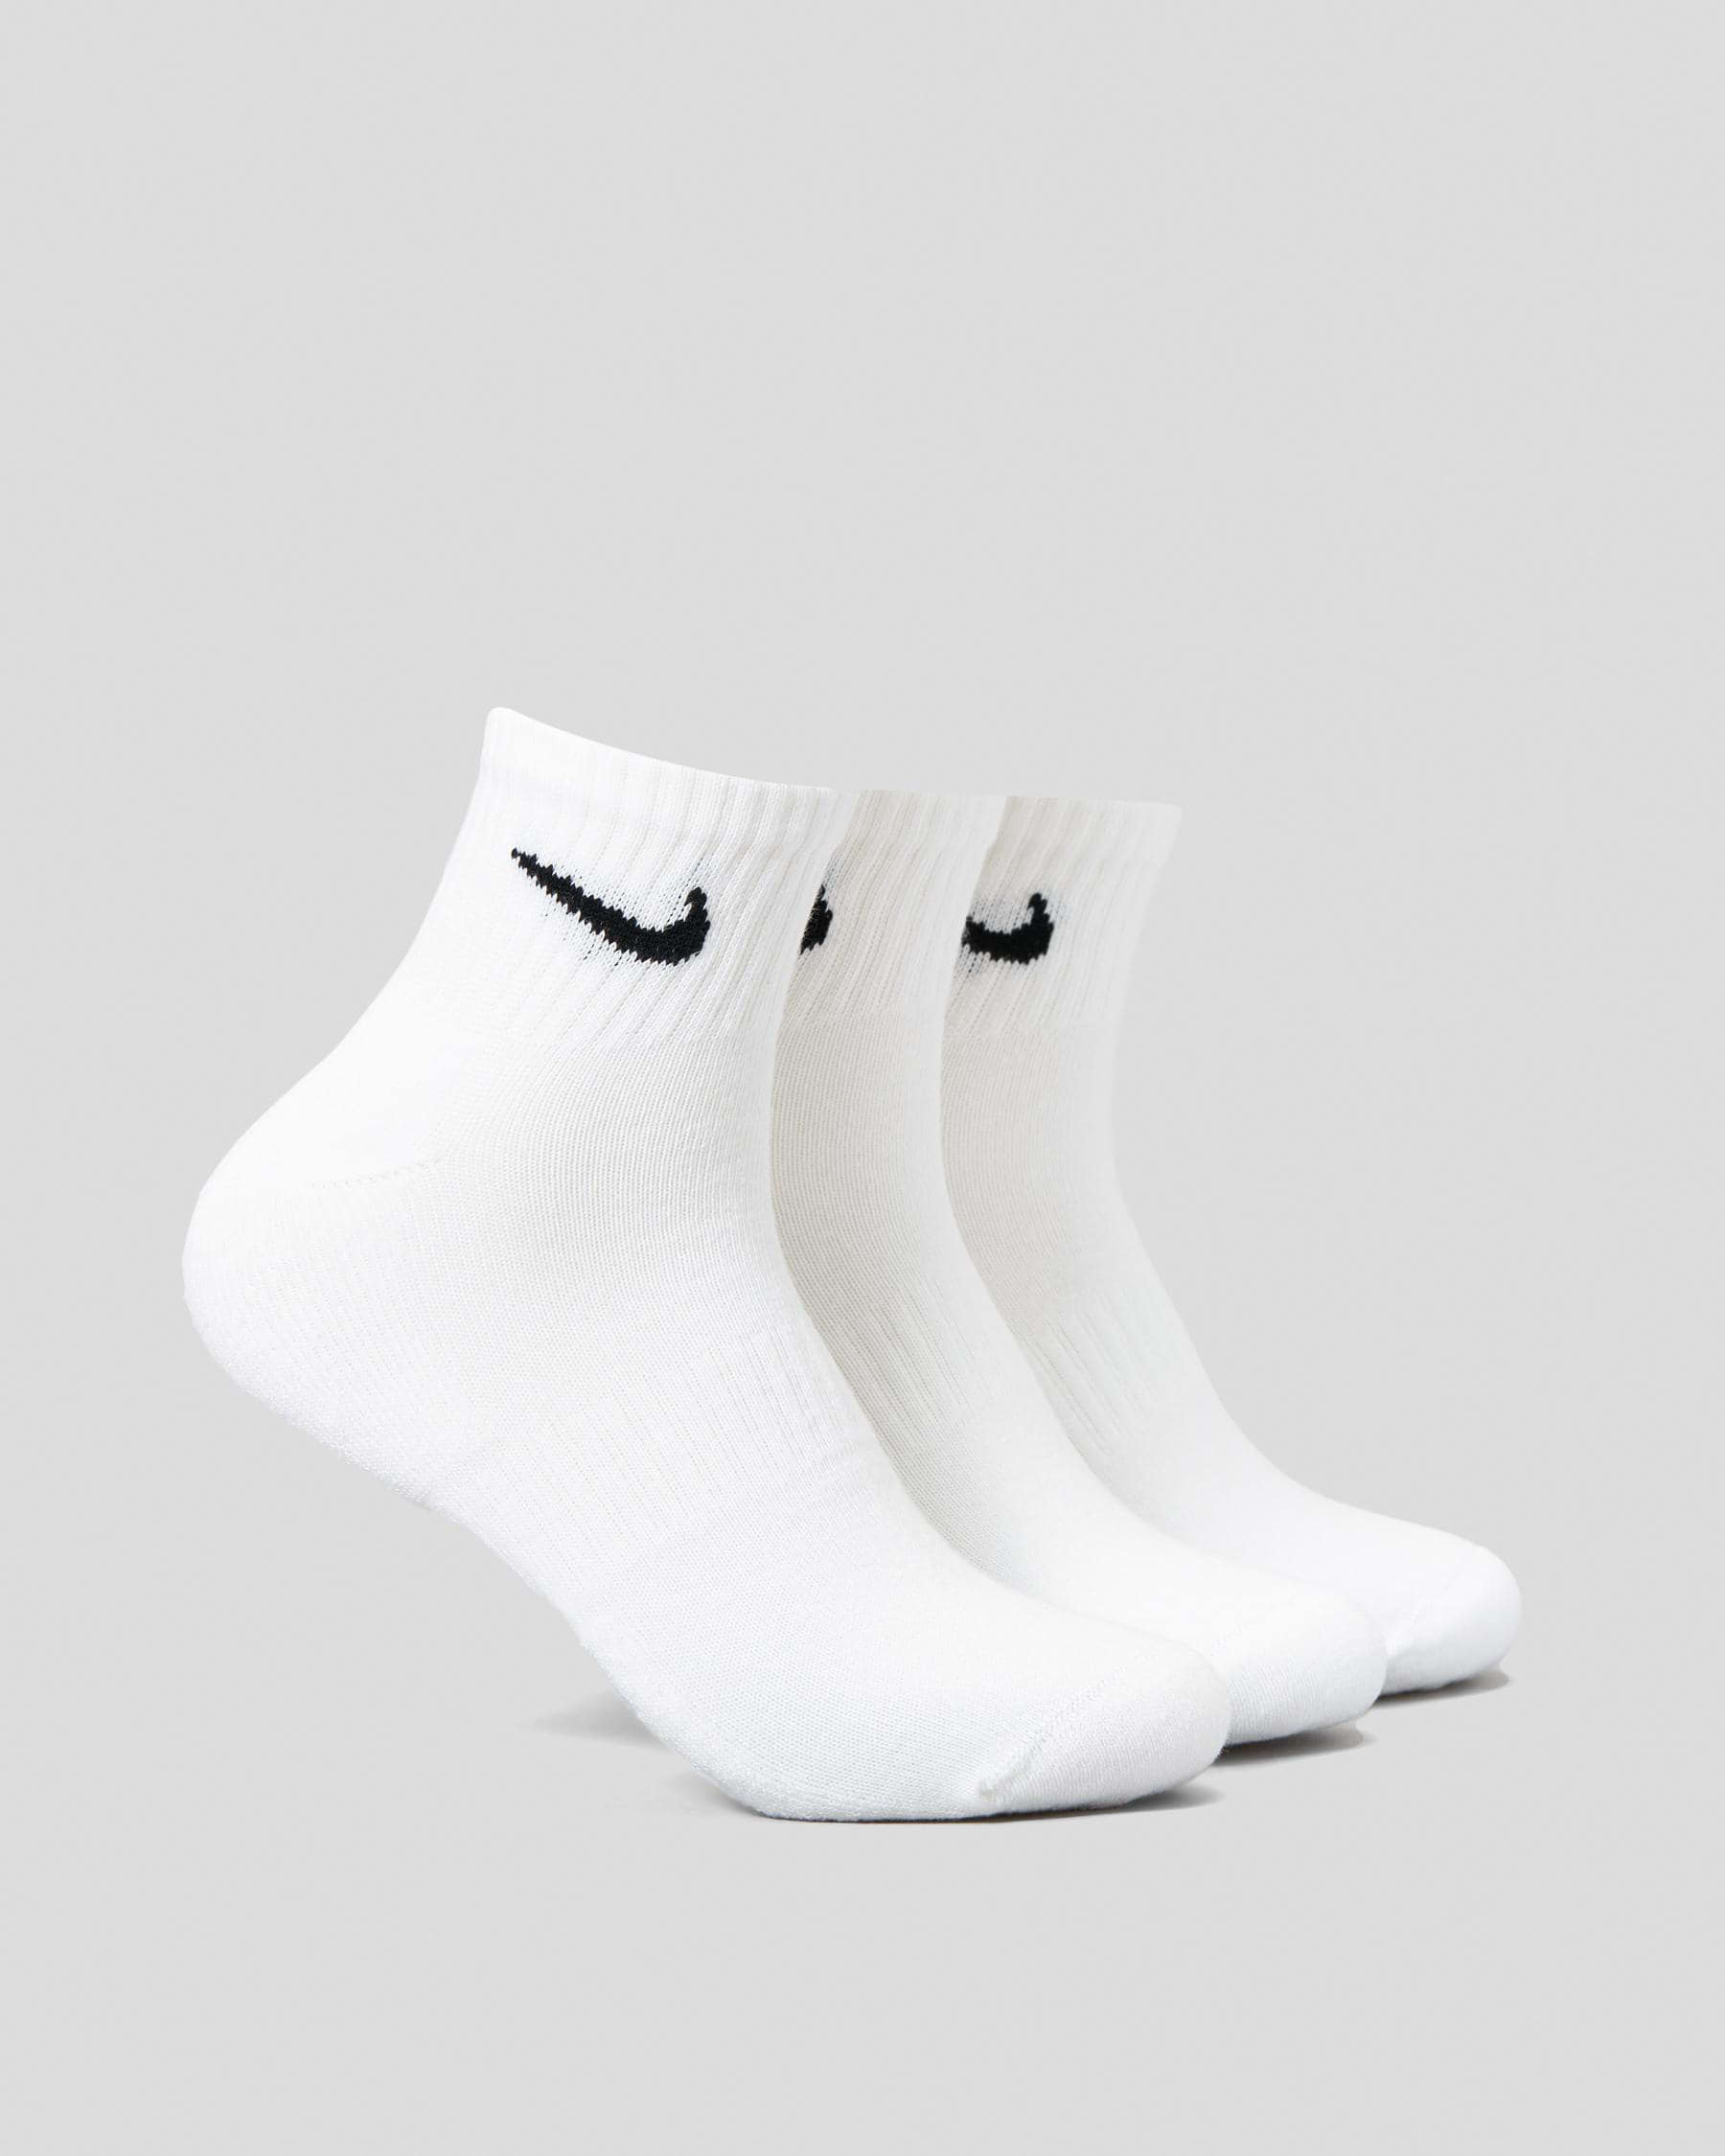 Nike Everyday Cushioned 3 Pack Socks In White/black - Fast Shipping ...